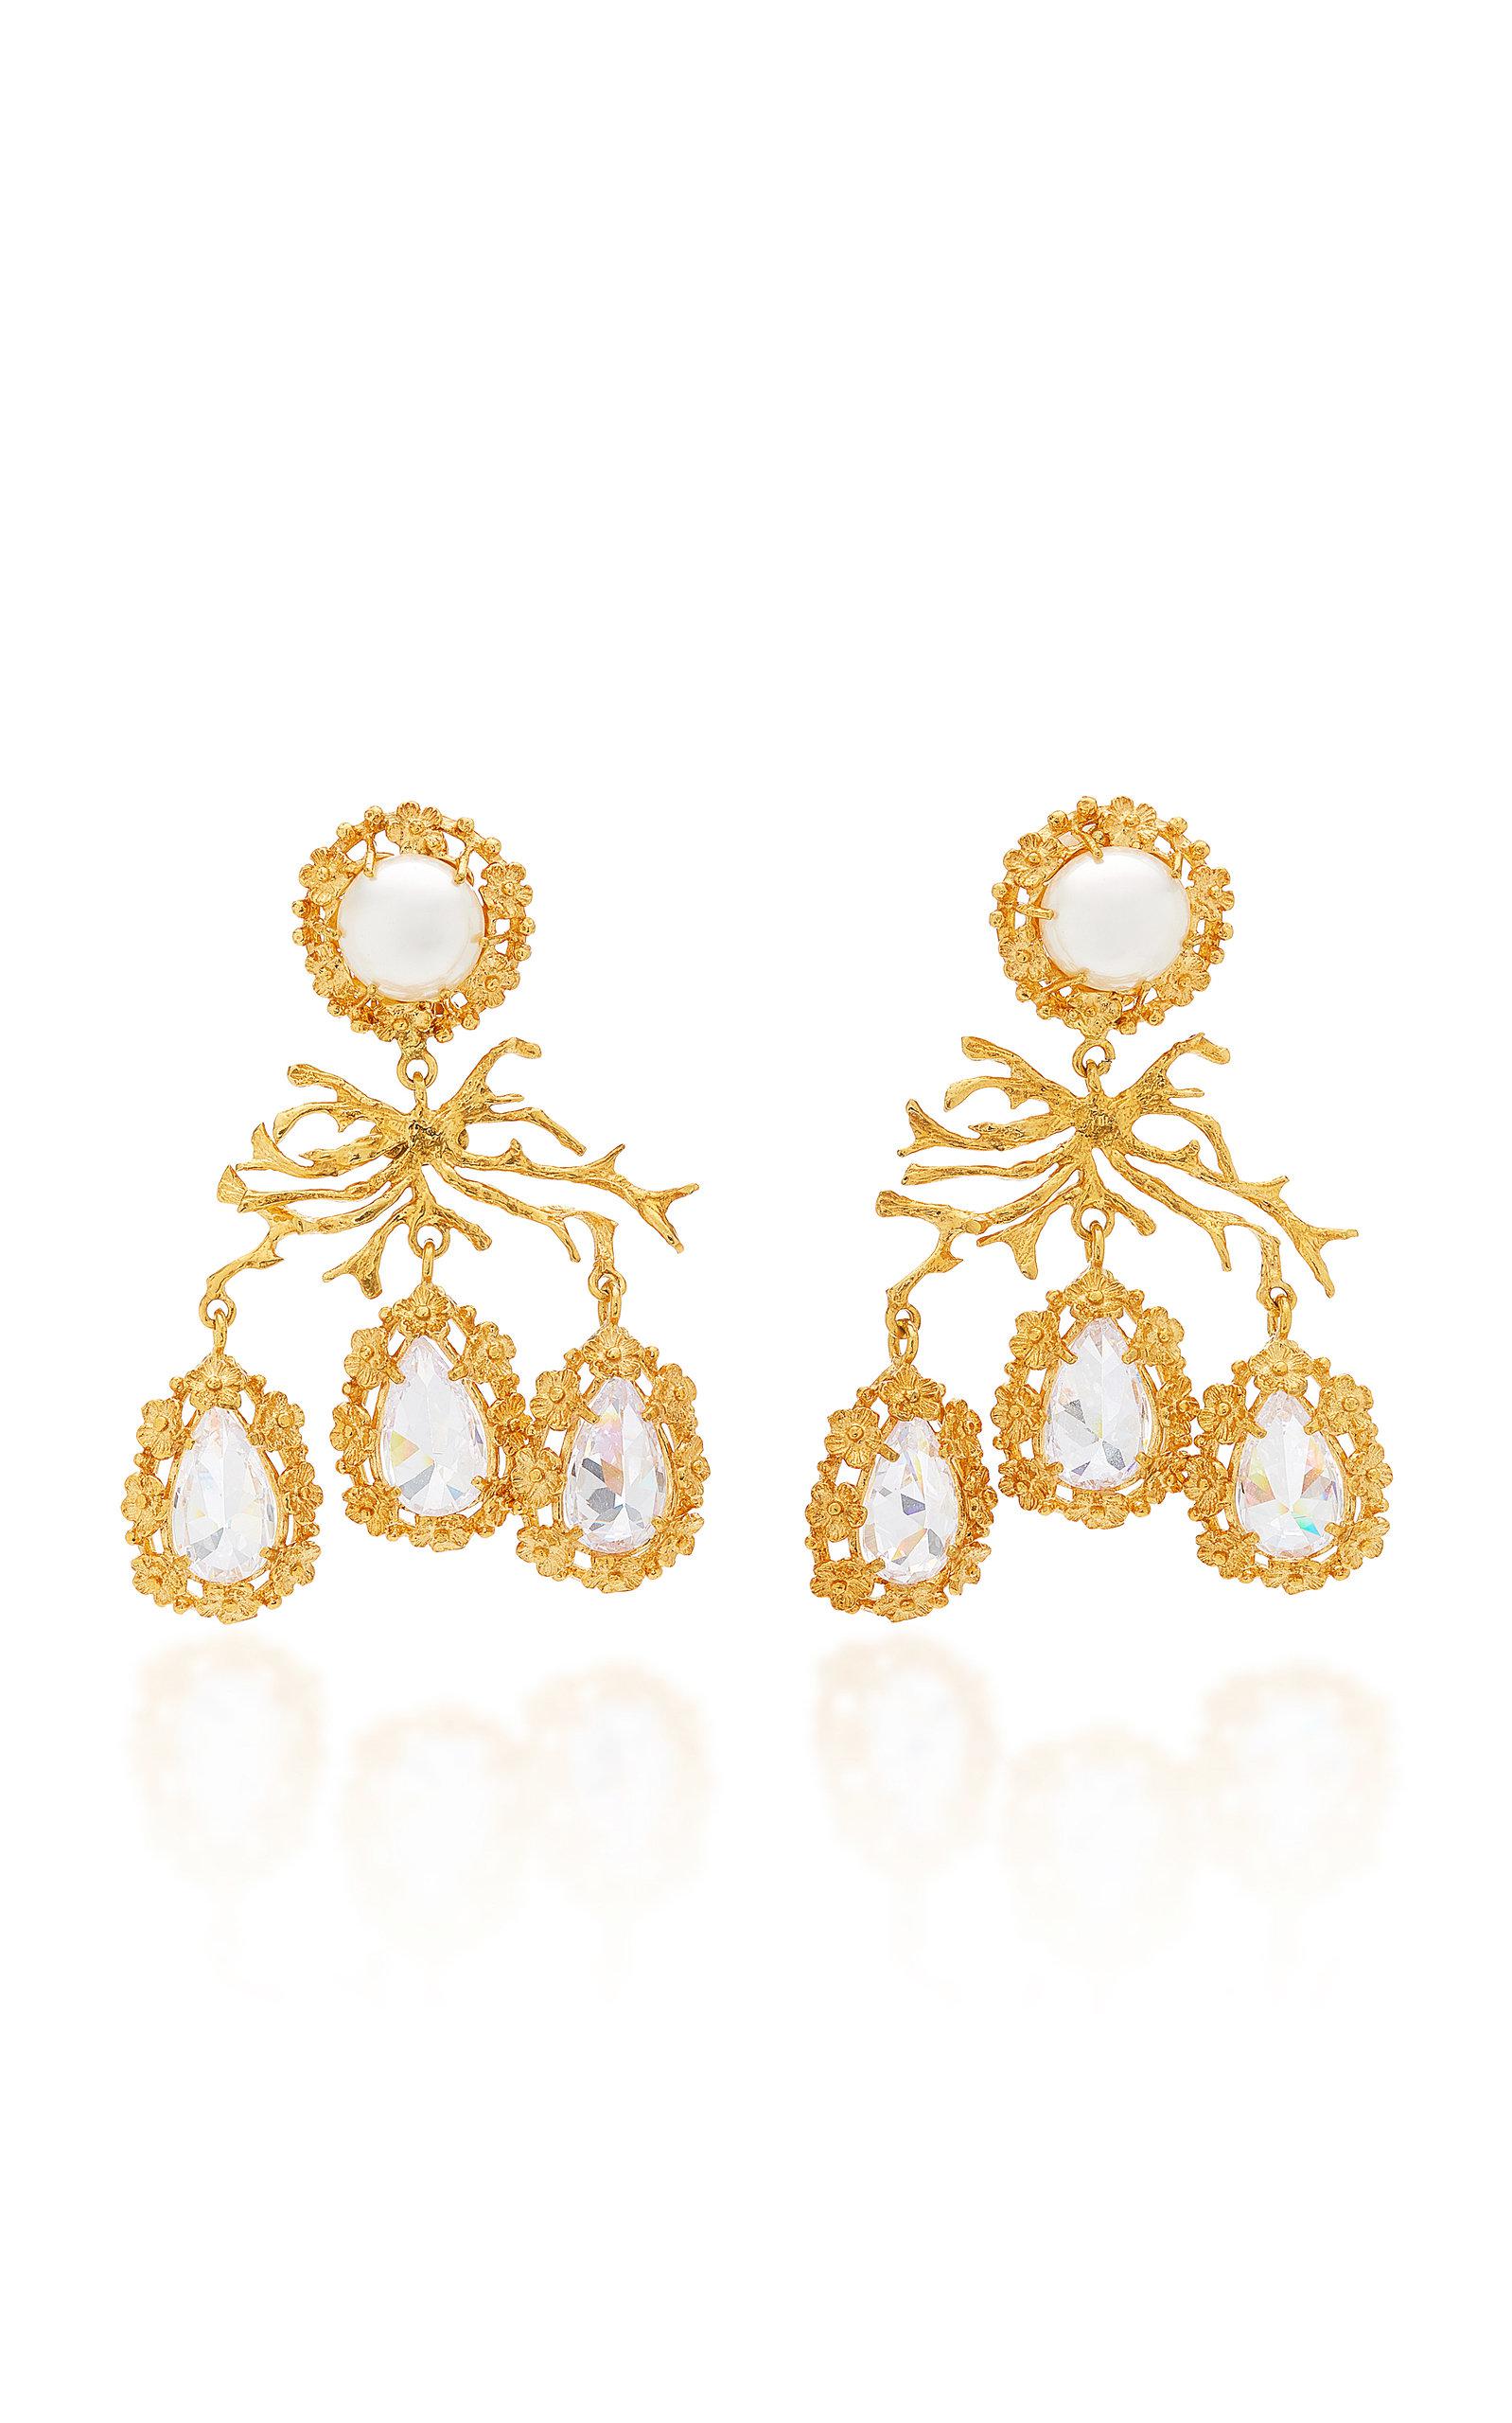 Christie Nicolaides Corallo Earrings in Gold (Metallic) | Lyst